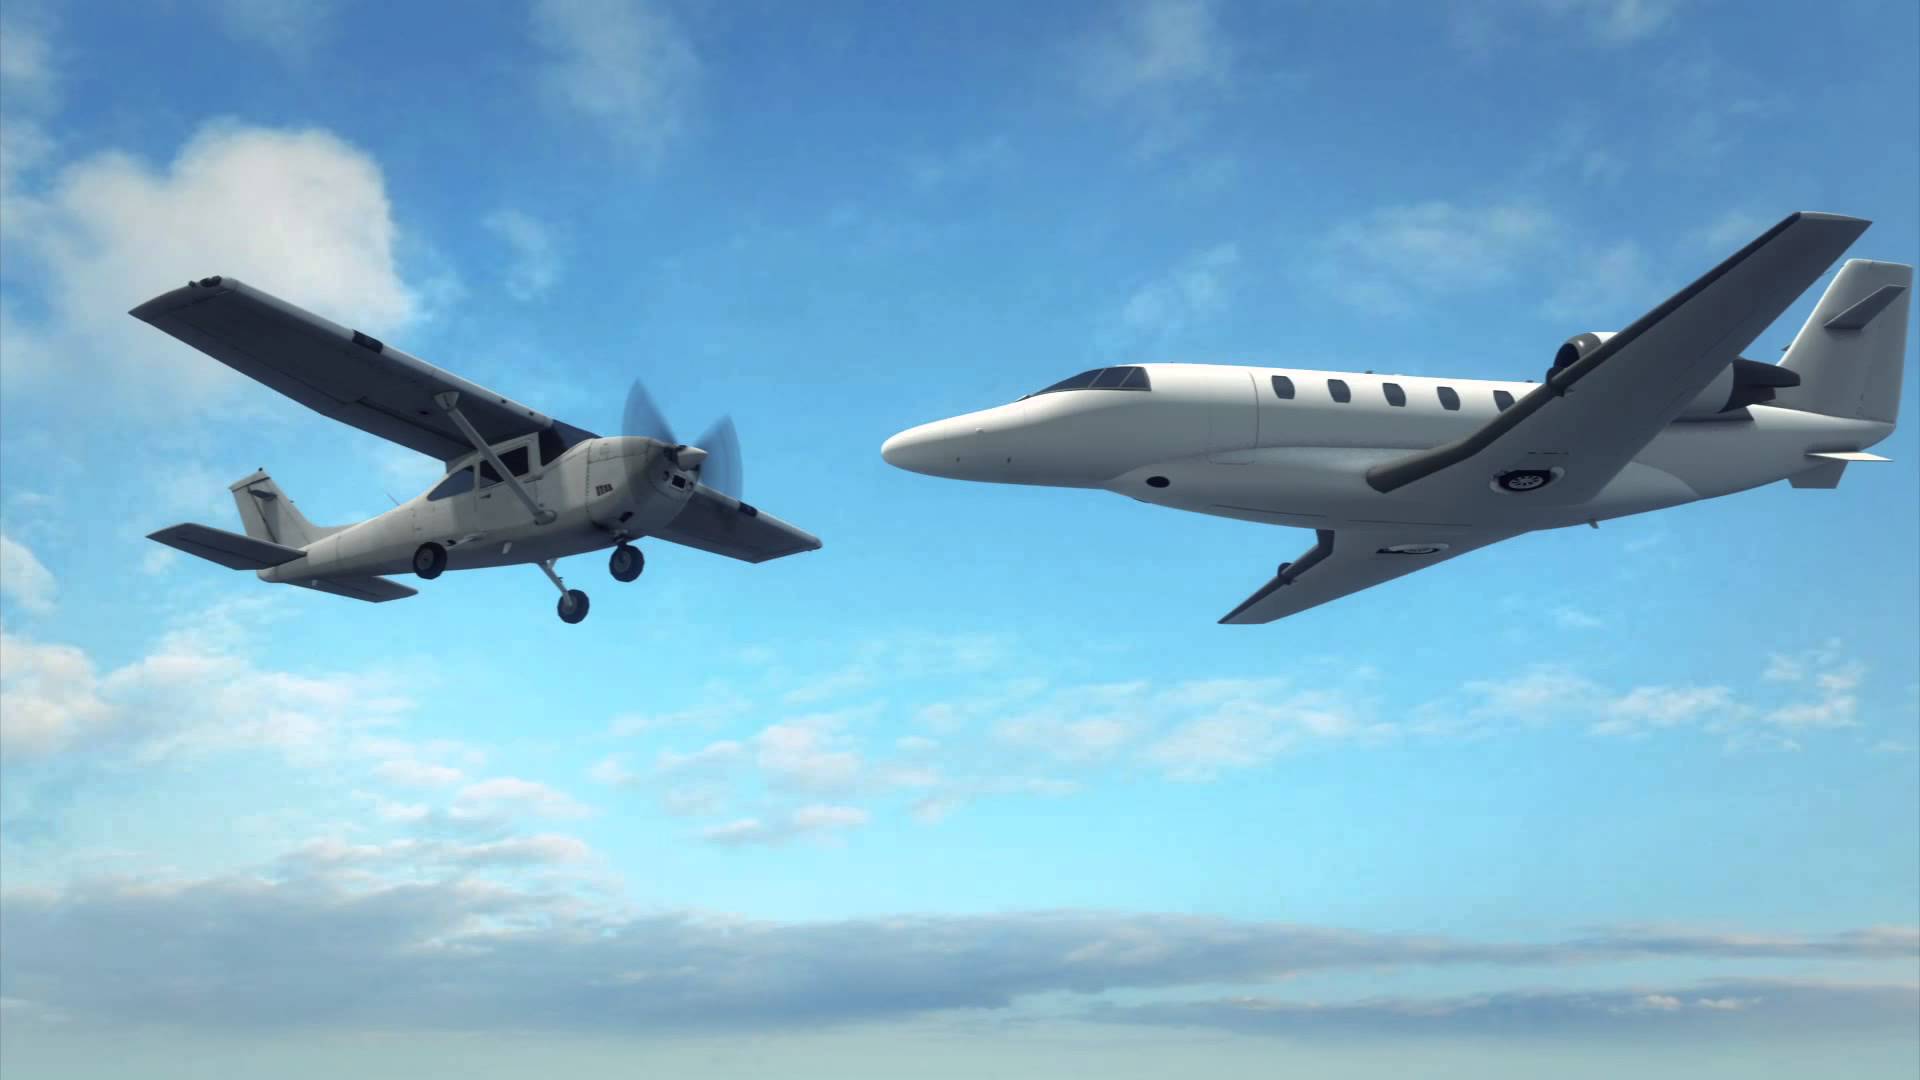 Two planes photo